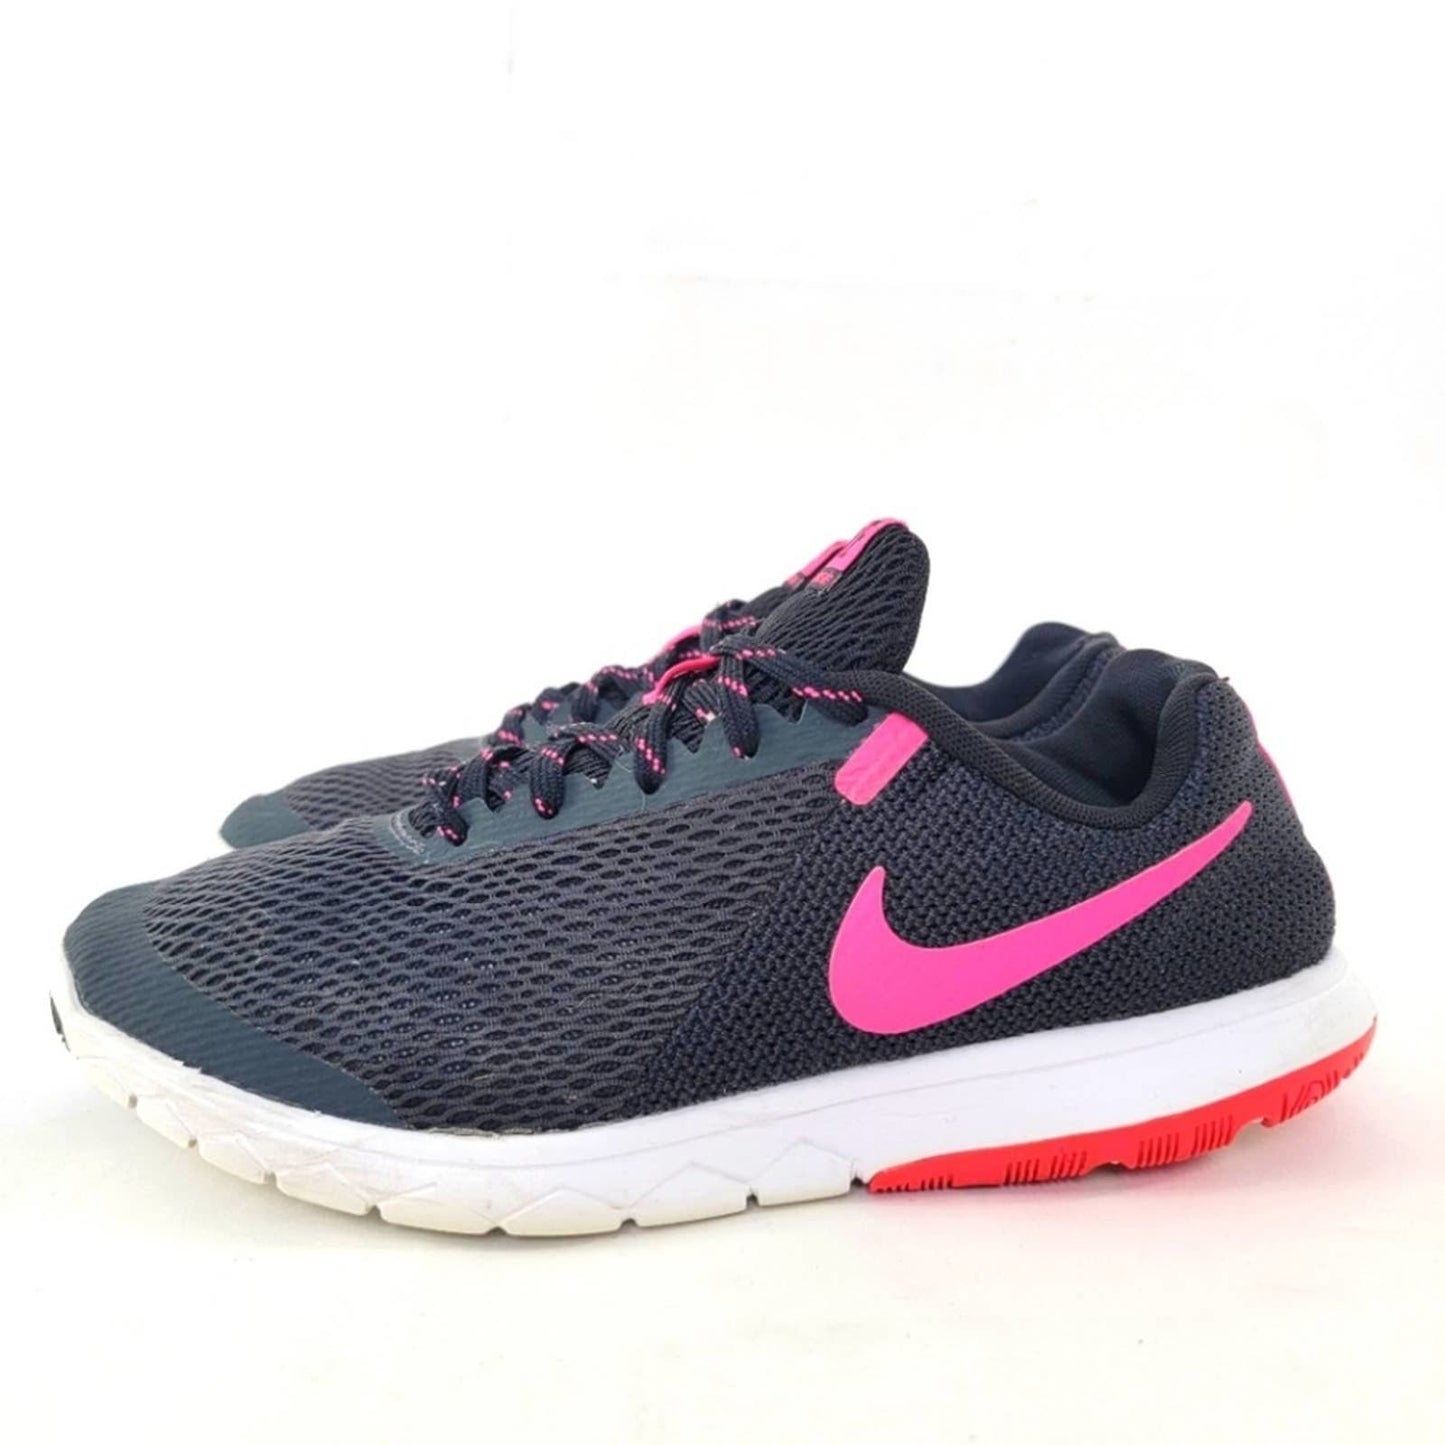 Nike Flex Experience RN 5 Running Shoes - 9.5